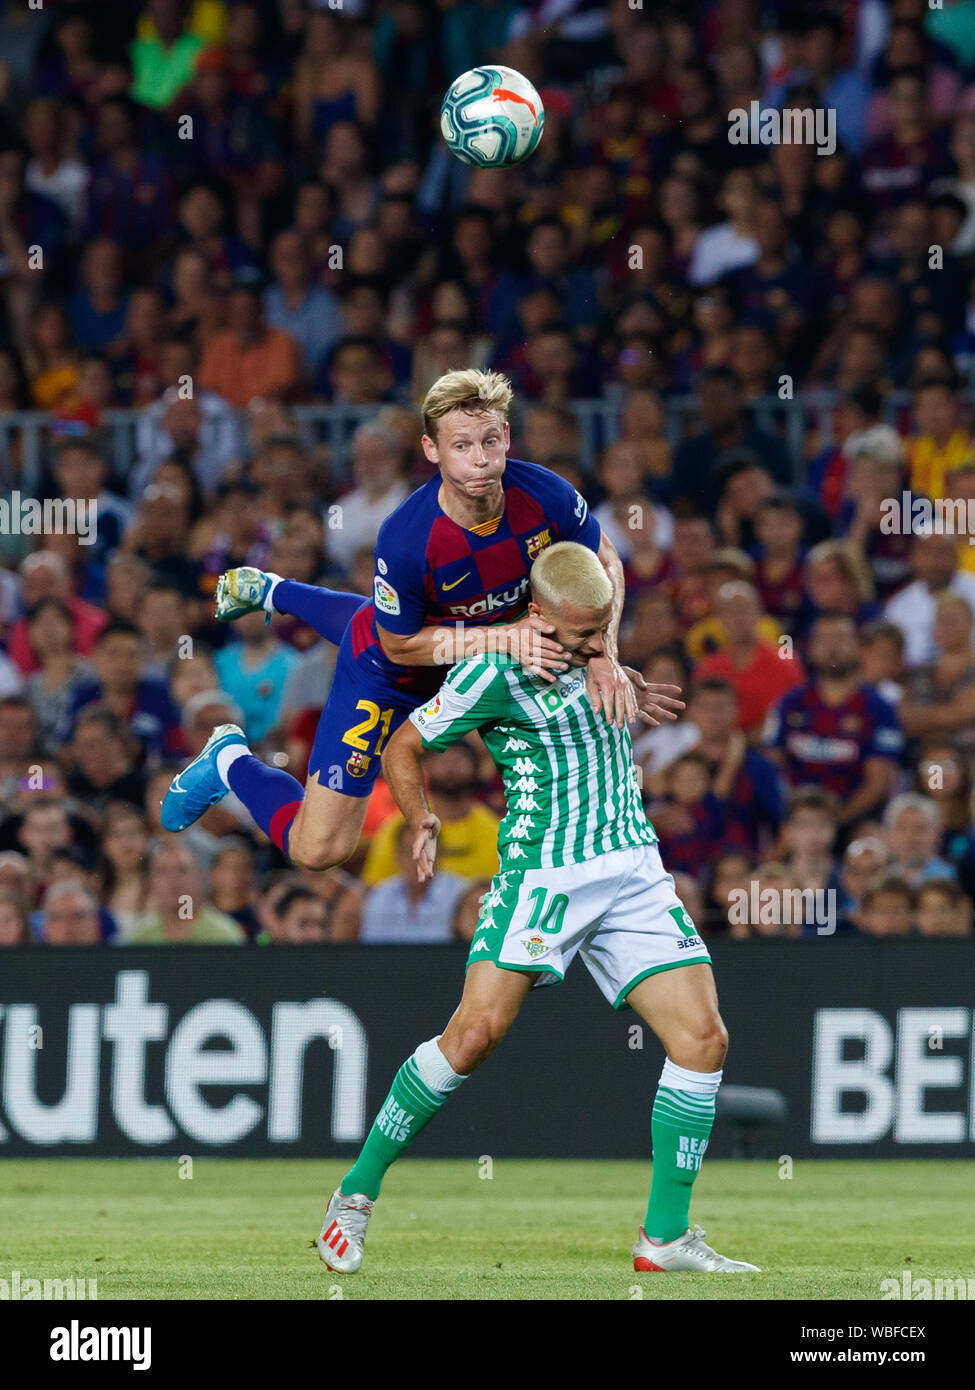 Barcelona, Spain. 25th Aug, 2019. BARCELONA, SPAIN - AUGUST 25: Sergio Canales of Real Betis in action with Frenkie de Jong of FC Barcelona during the Liga match between FC Barcelona and Real Betis at Camp Nou on August 25, 2019 in Barcelona, Spain. (Photo by David Ramirez/Pacific Press) Credit: Pacific Press Agency/Alamy Live News Stock Photo